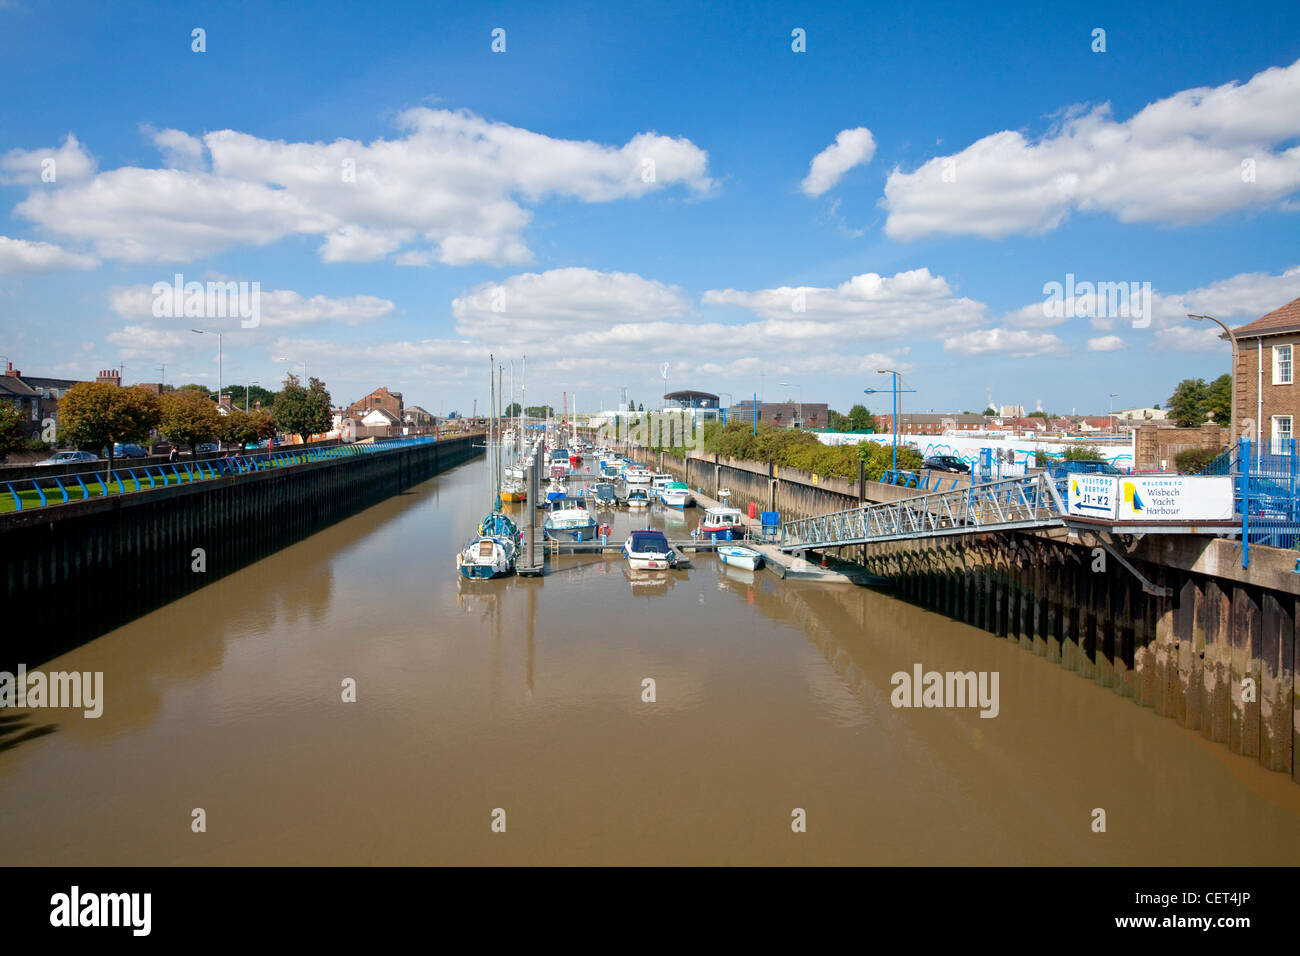 Boats moored by jetties in the Wisbech Yacht Harbour on the River Nene. Stock Photo